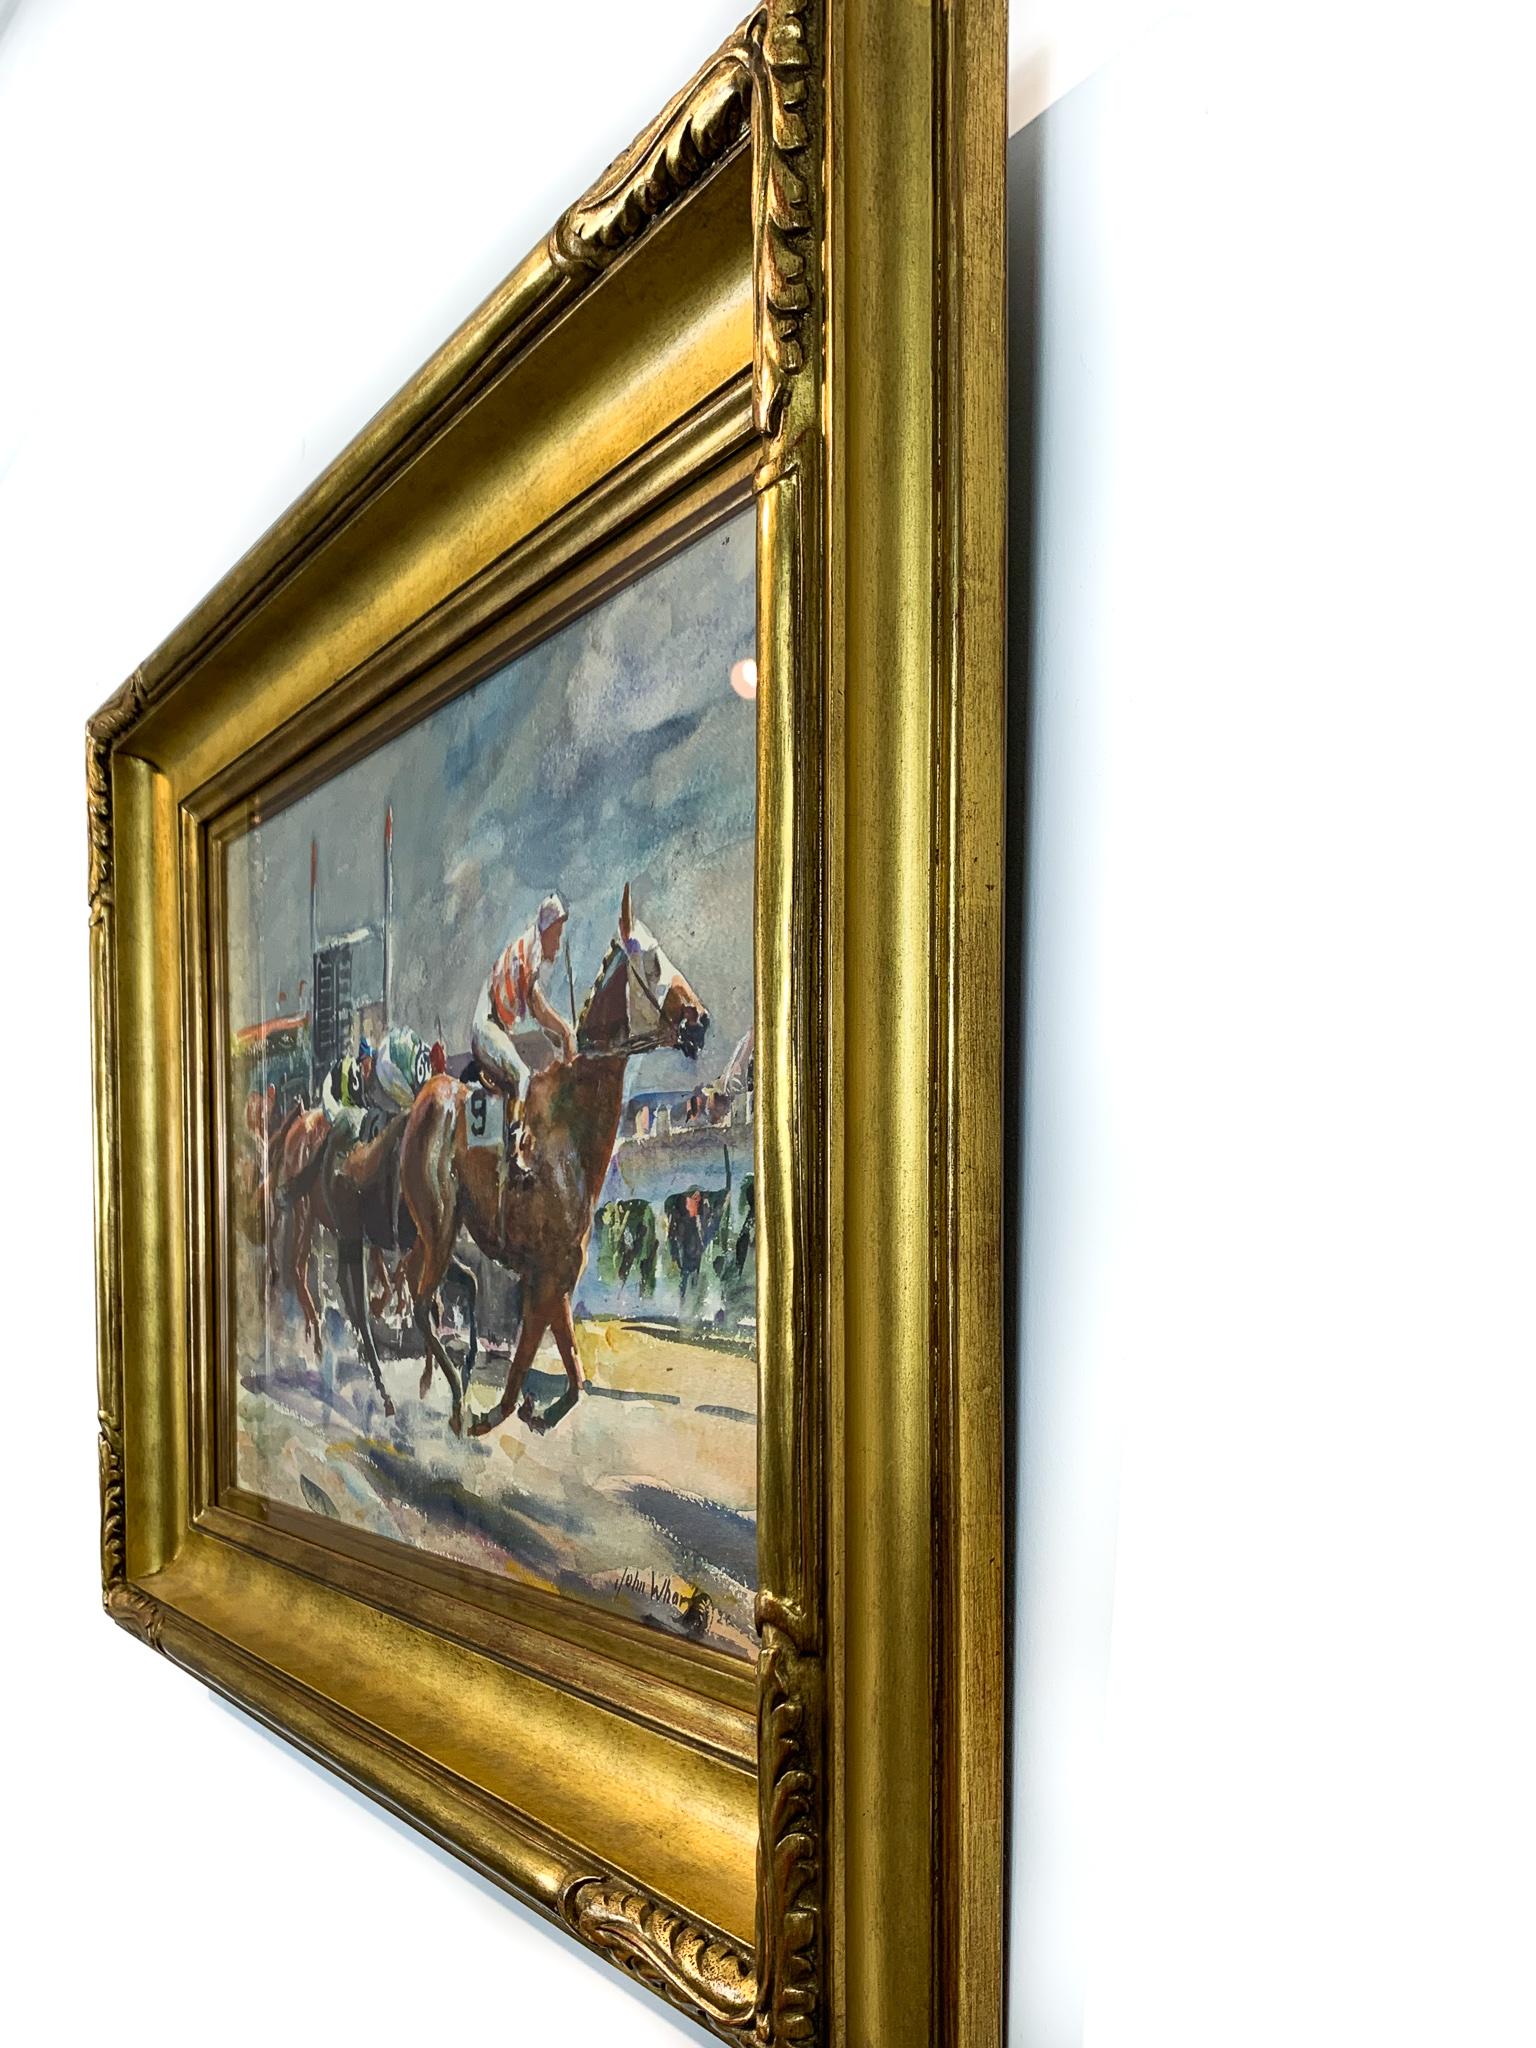 Framed Dimensions:
23h x 30w inches

Signature:
Signed and dated at lower right: John Whorf 26.

Provenance:
Estate of Francoise Hermann, Cape Cod, Massachusetts

Exhibitions:
Adelson Galleries, New York, American Works on Paper, 1880-1930, October